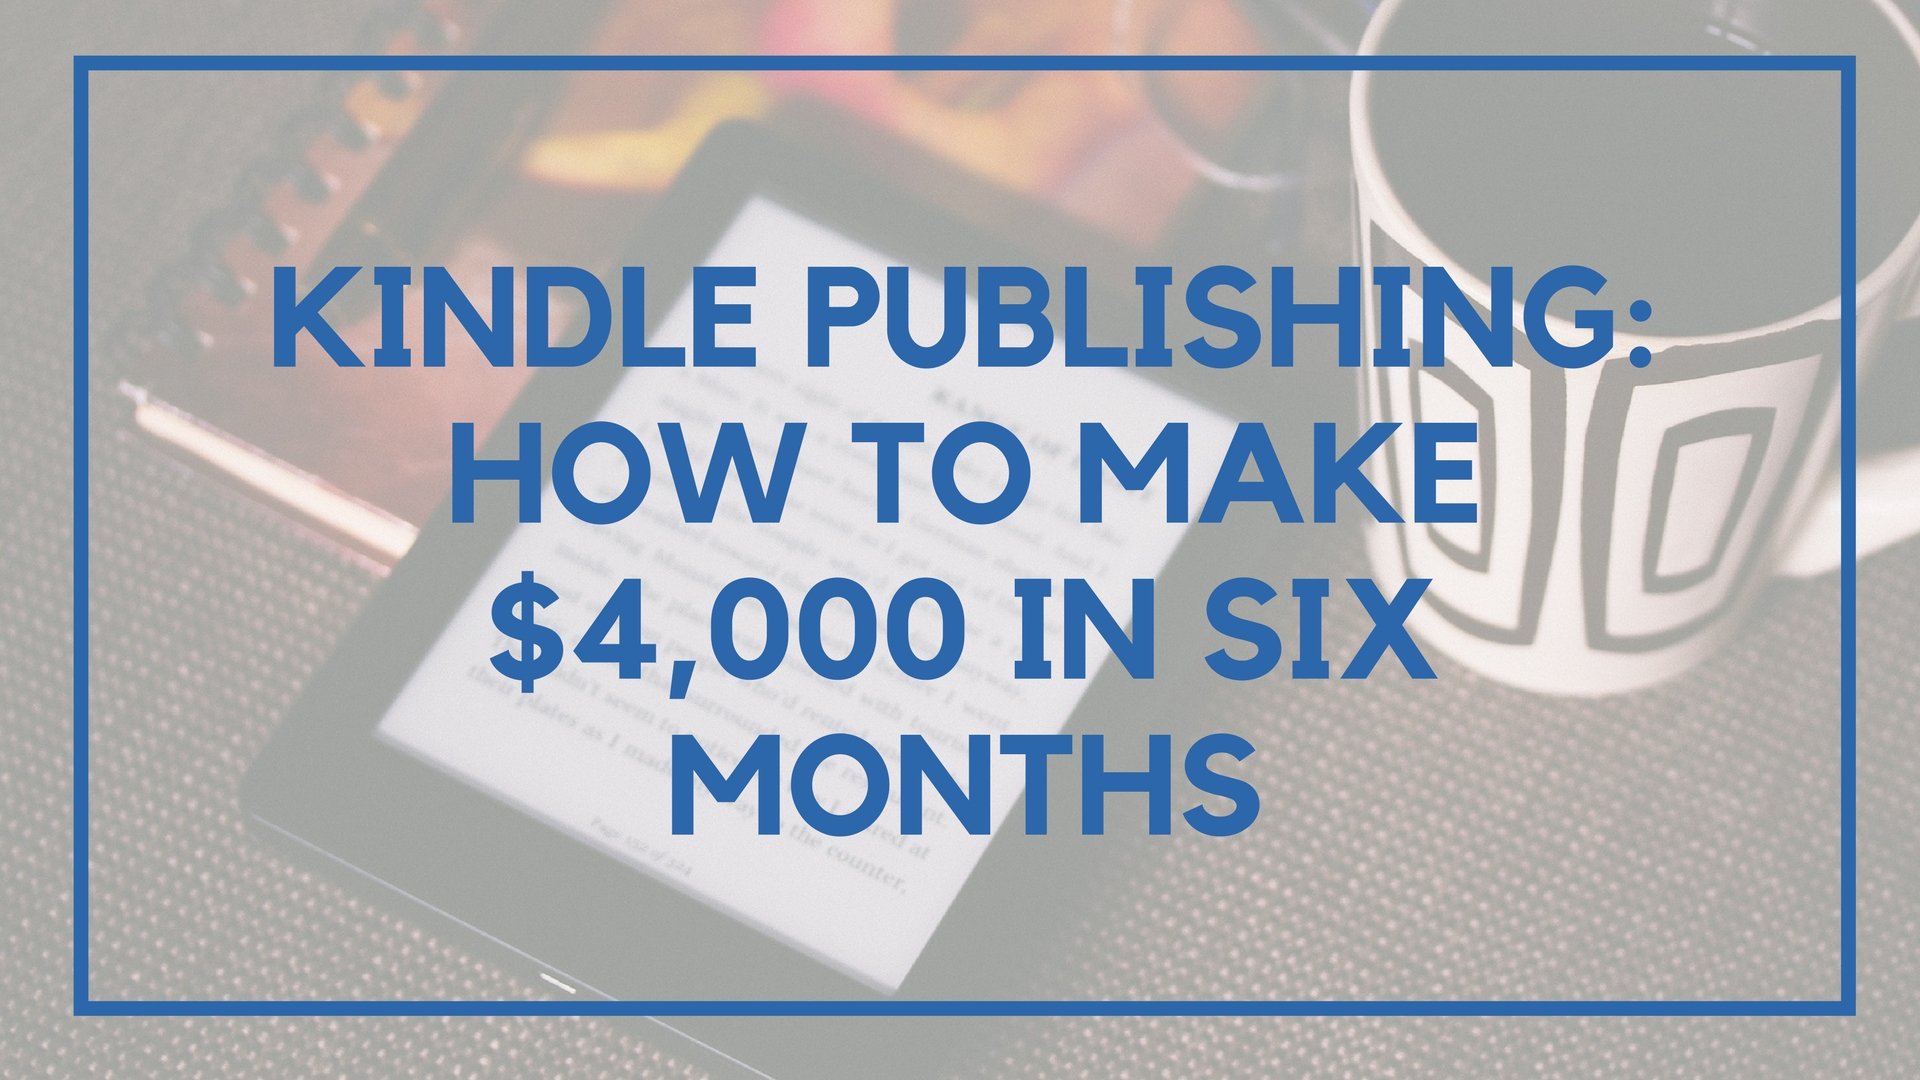 How I Made $2,000 in 1 Week by Self-Publishing an eBook